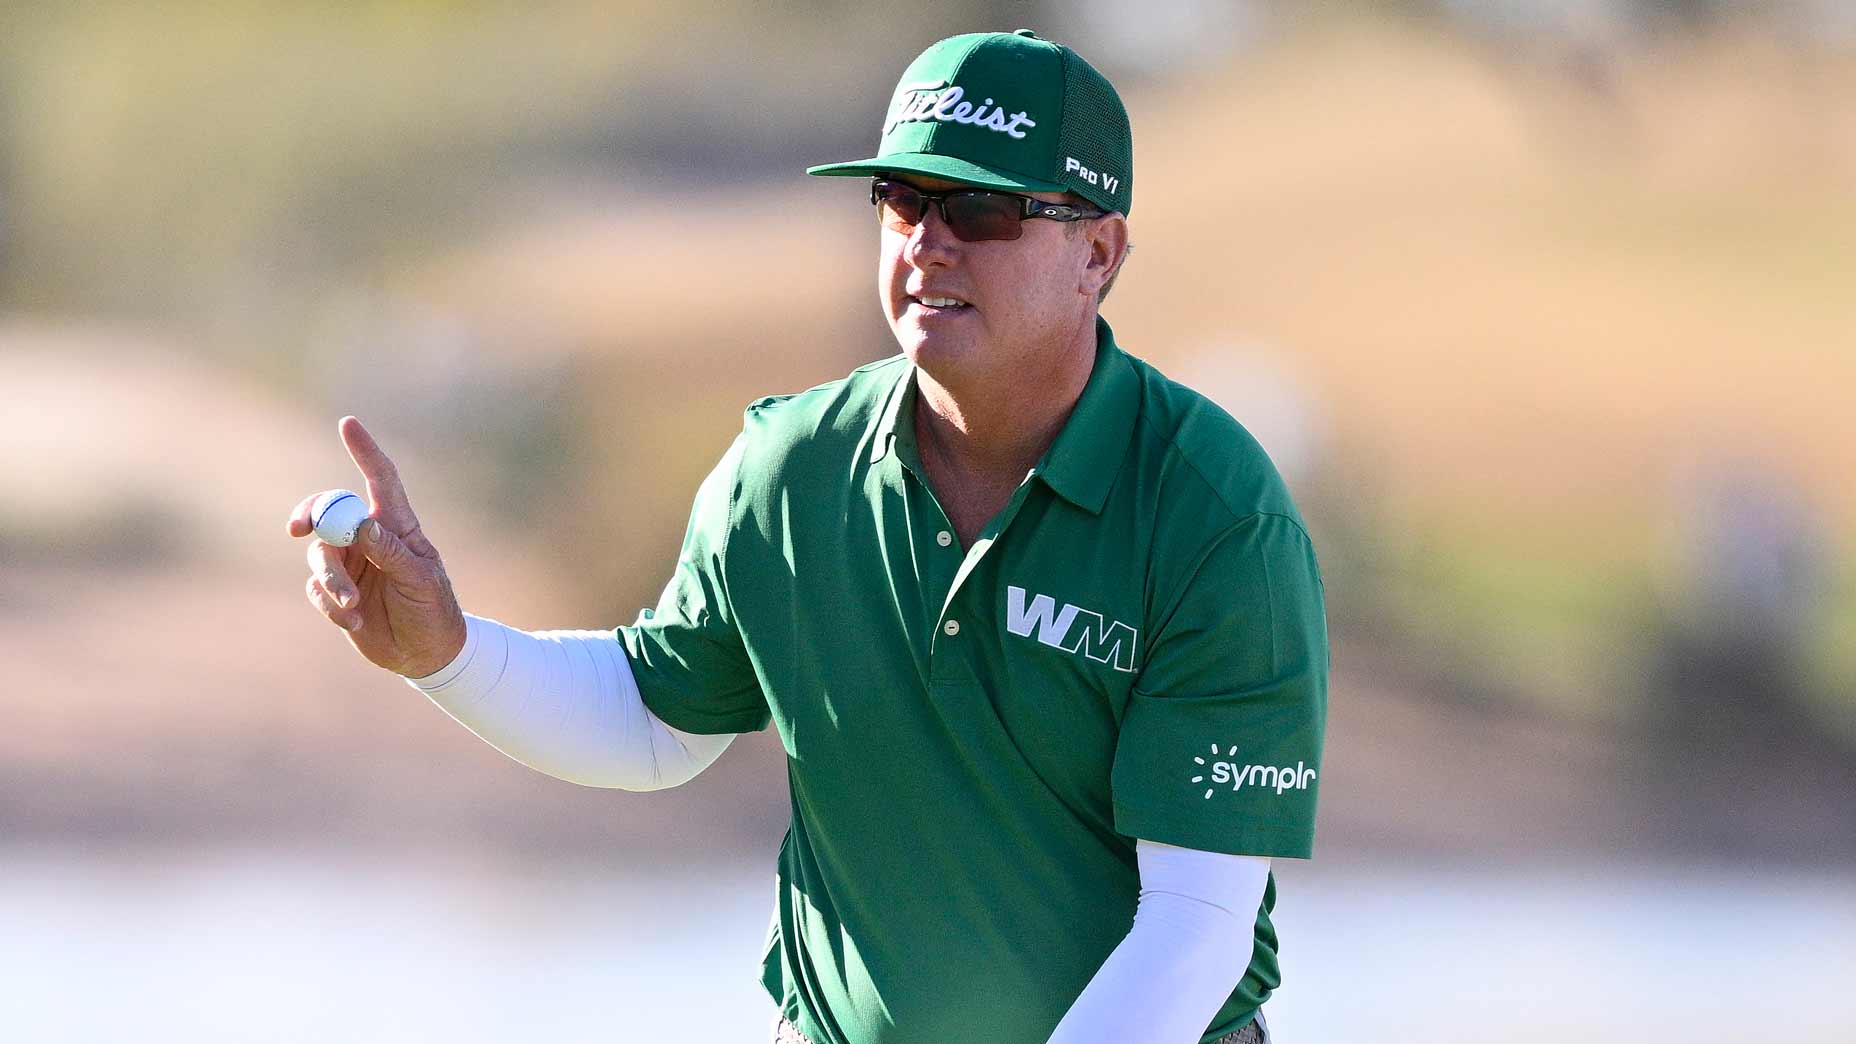 PGA TOur pro Charley Hoffman waves to fans on green at 2024 WM Phoenix Open